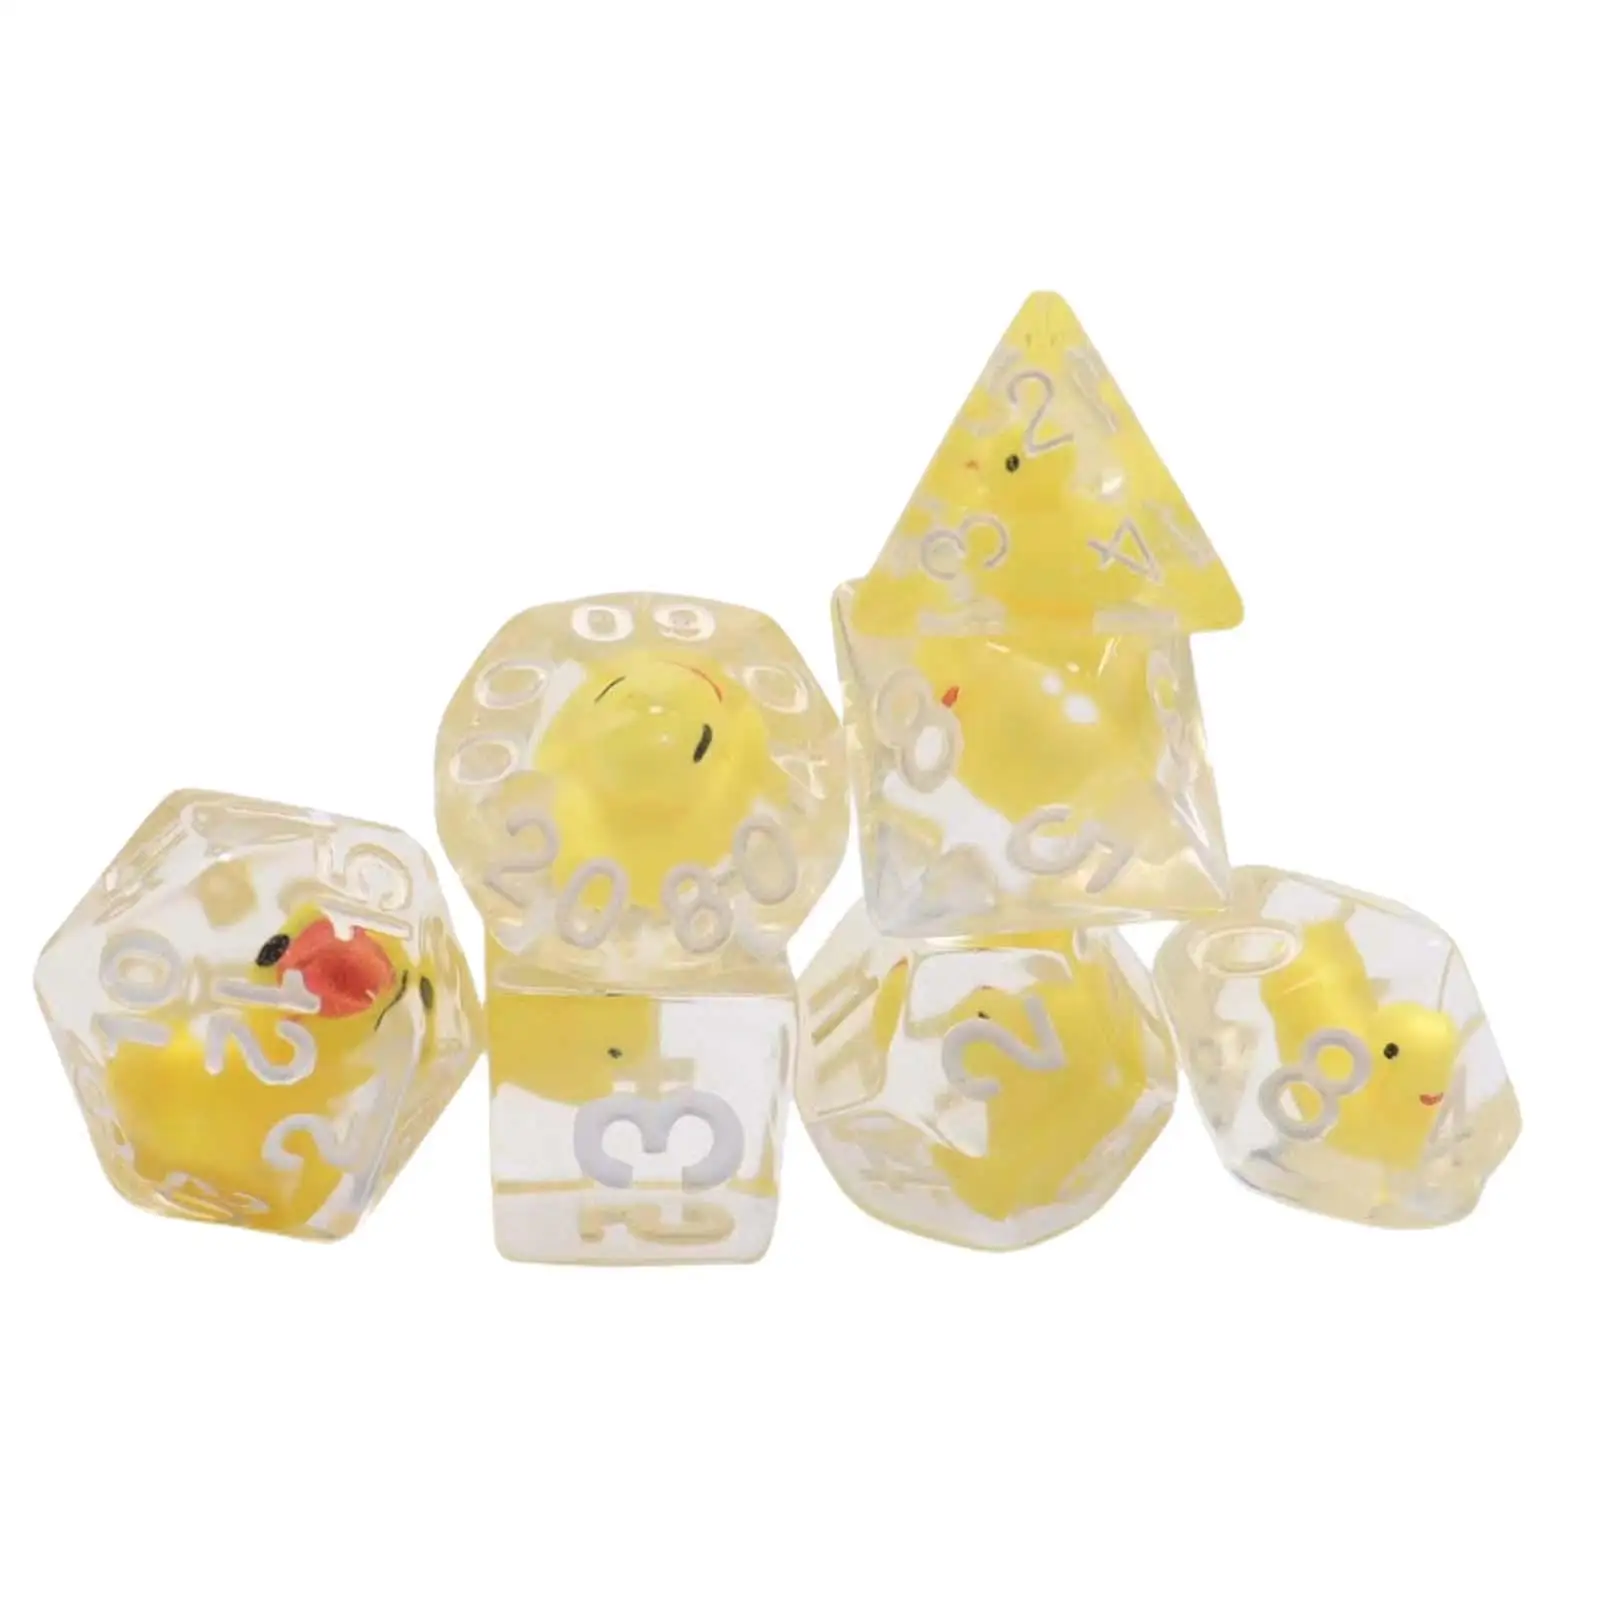 7Pcs Game Dices Playing Dices Entertainment Toys Party Supplies D4-d20 Polyhedral Dices Set Acrylic Dices for KTV Bar Board Game